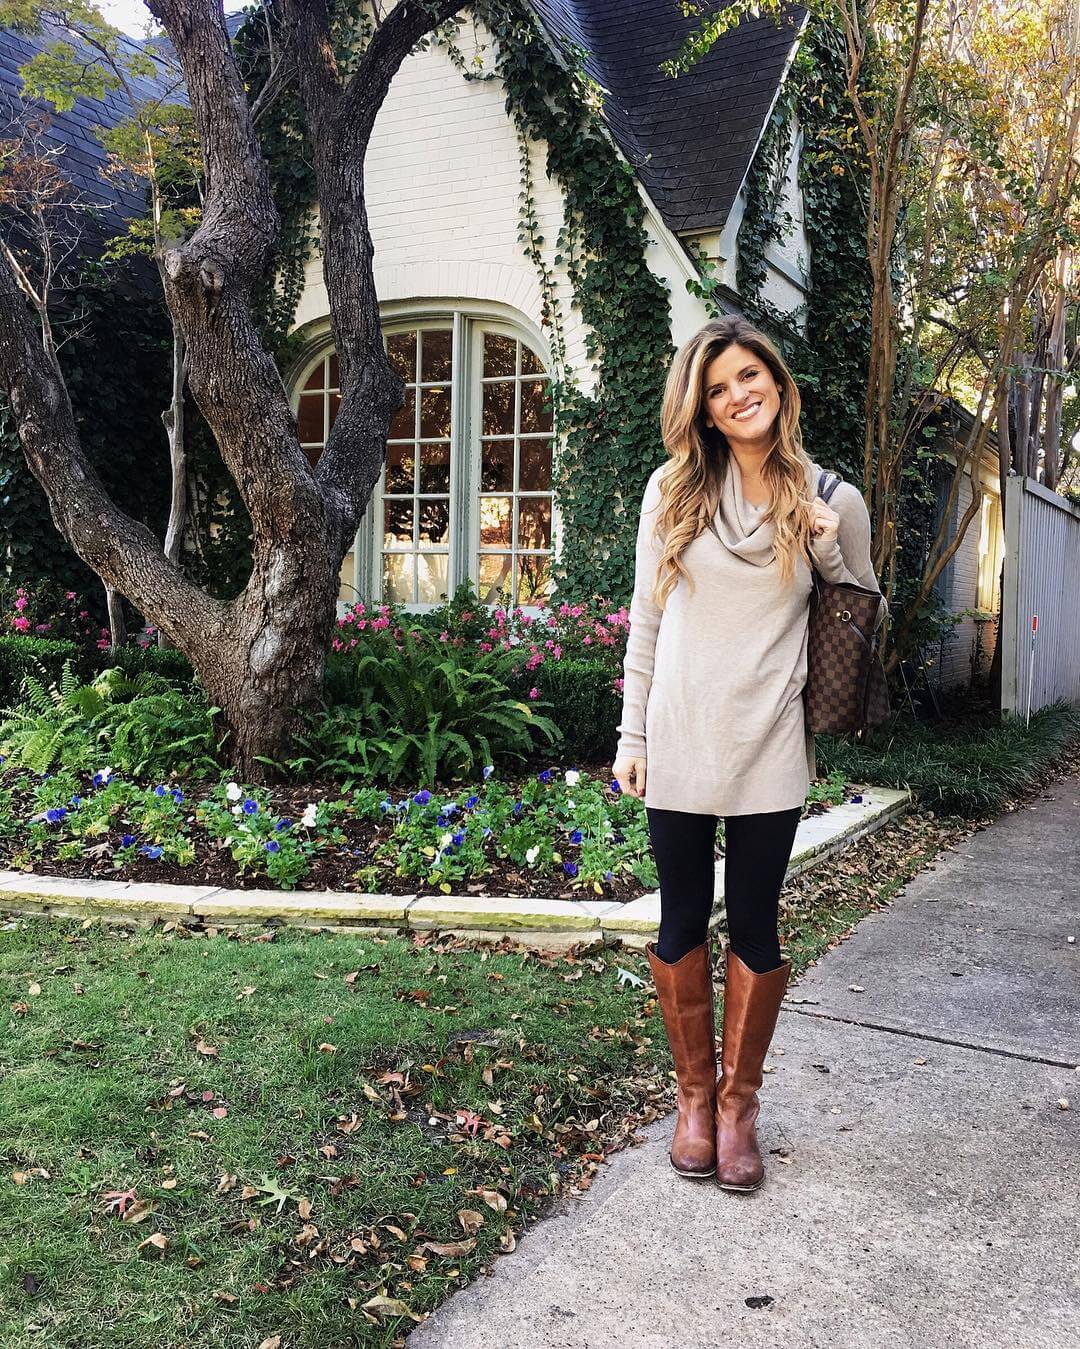 brighton the day styling leggins, cowl neck sweater, riding boots, tunic and leggings outfit, black and brown outfit, casual fall outfit